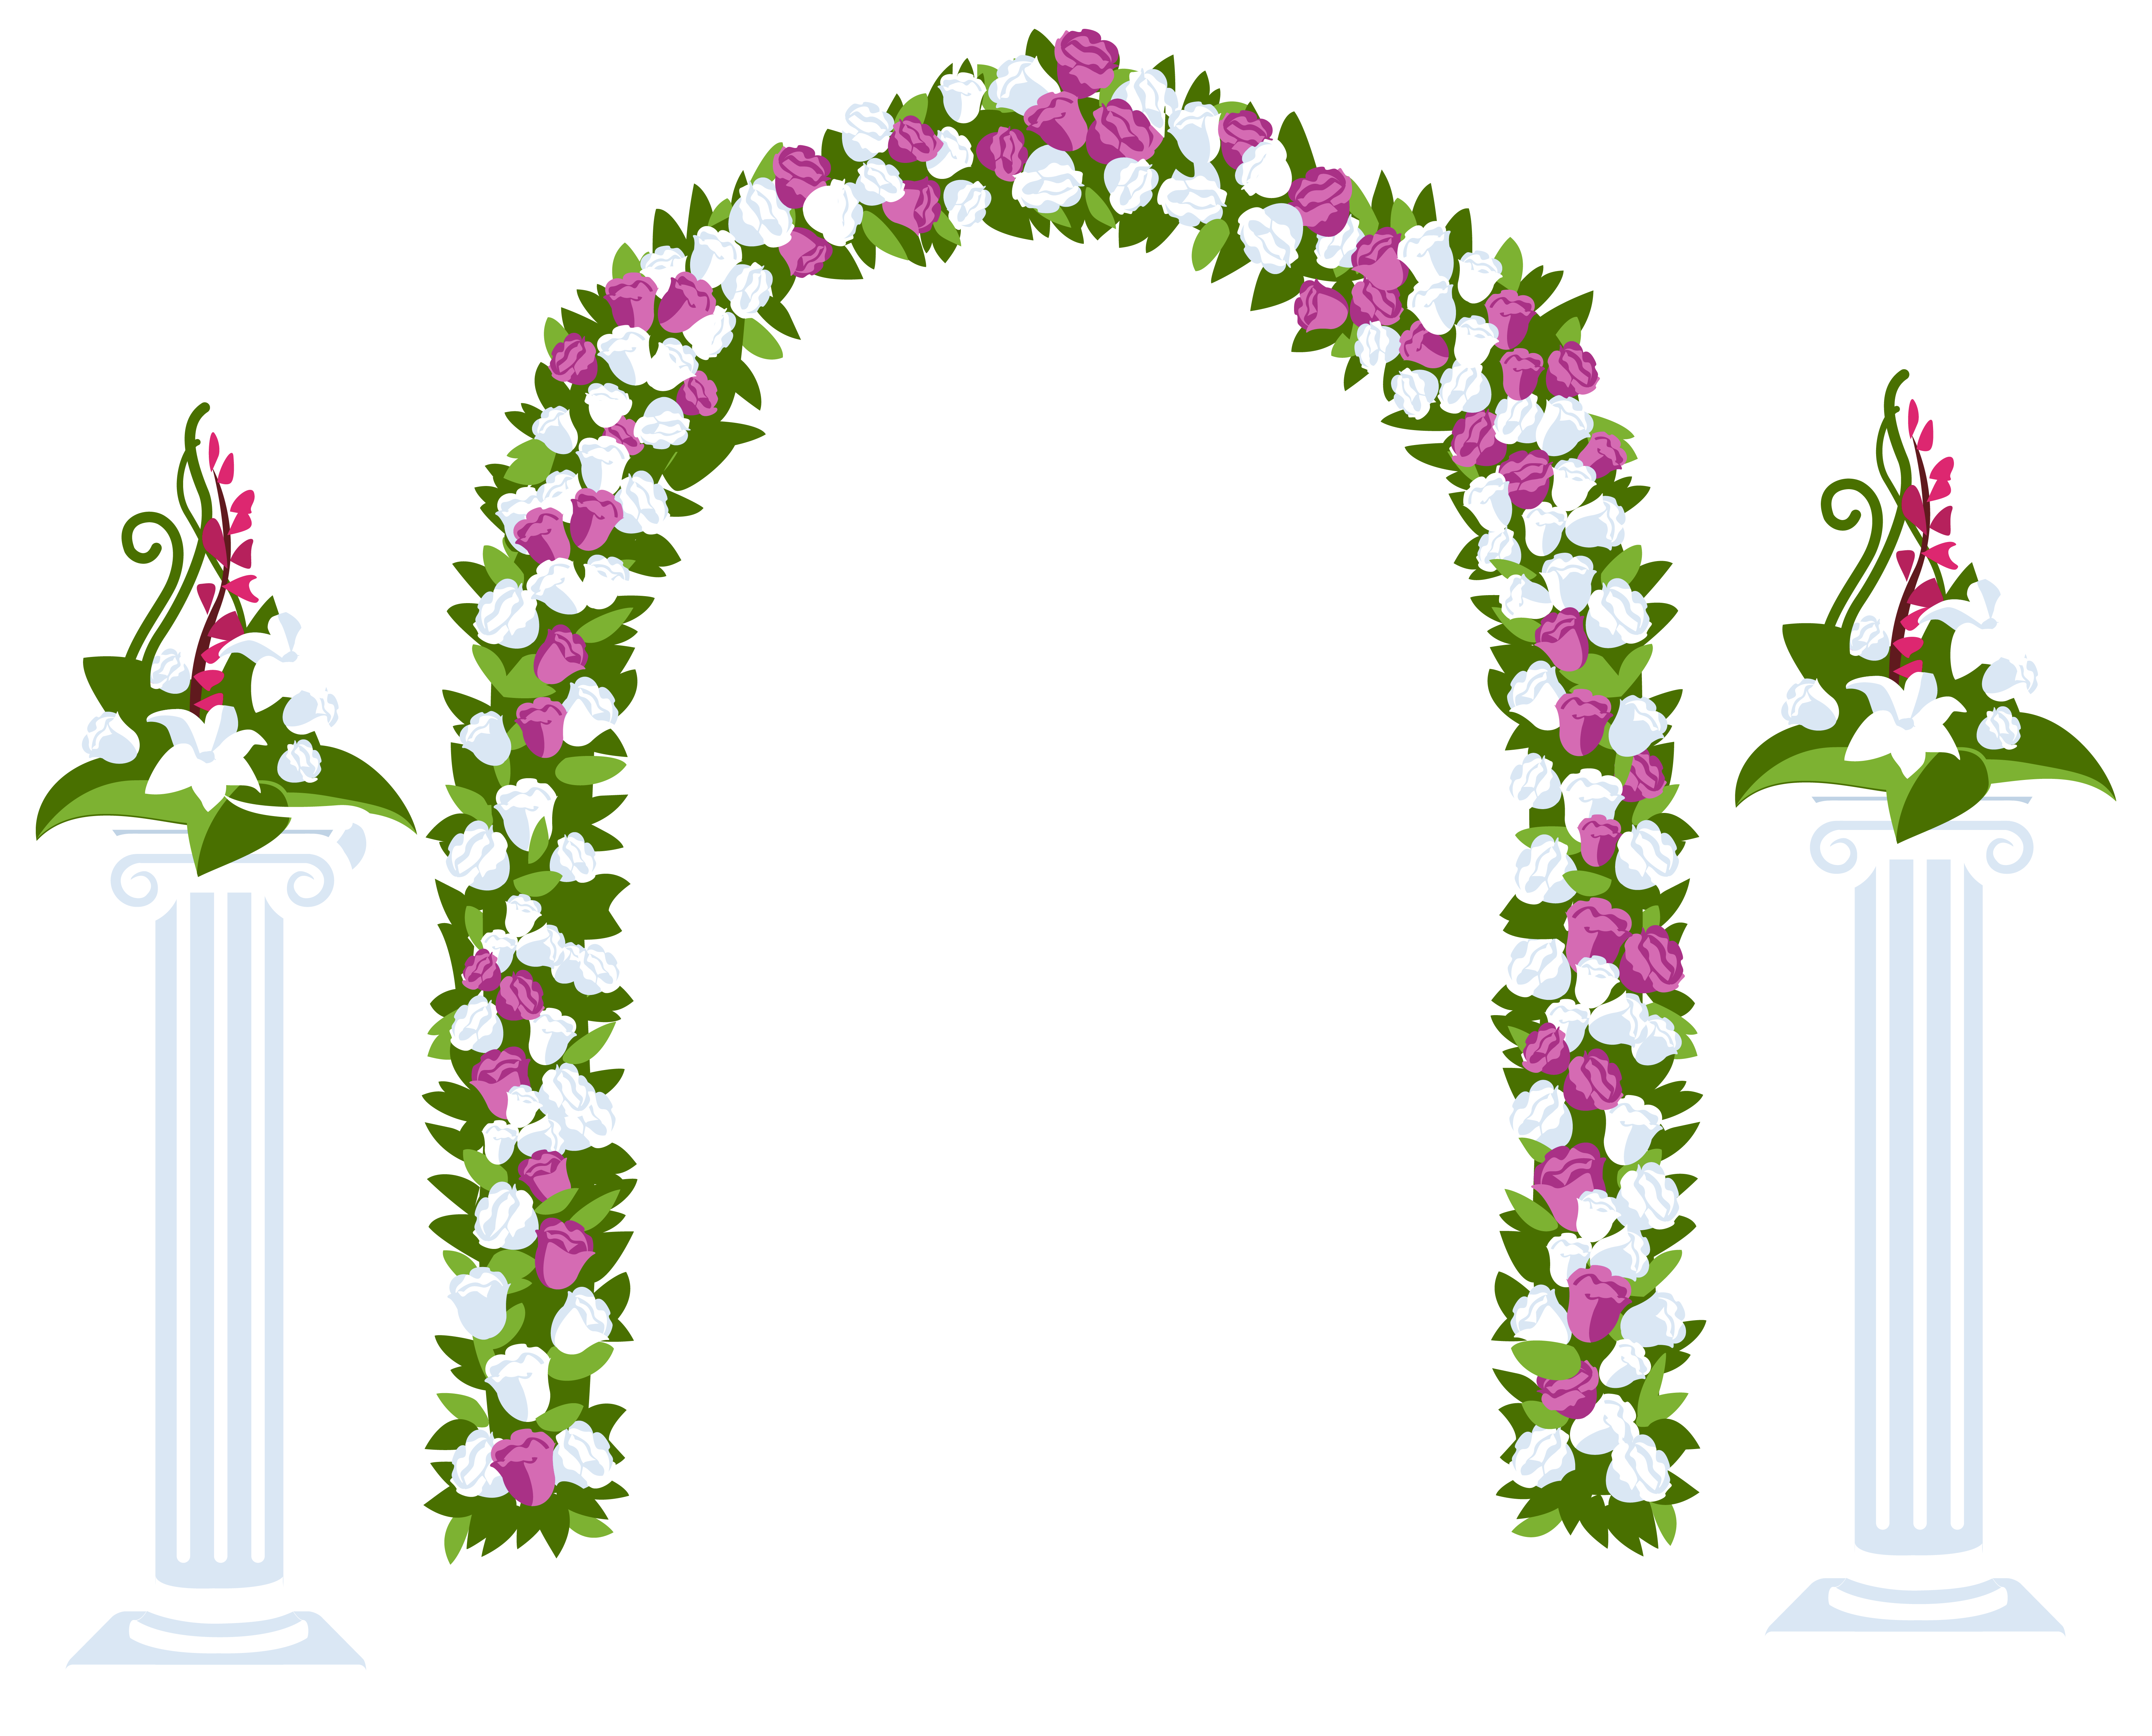 Arch and columns best. Clipart bow floral